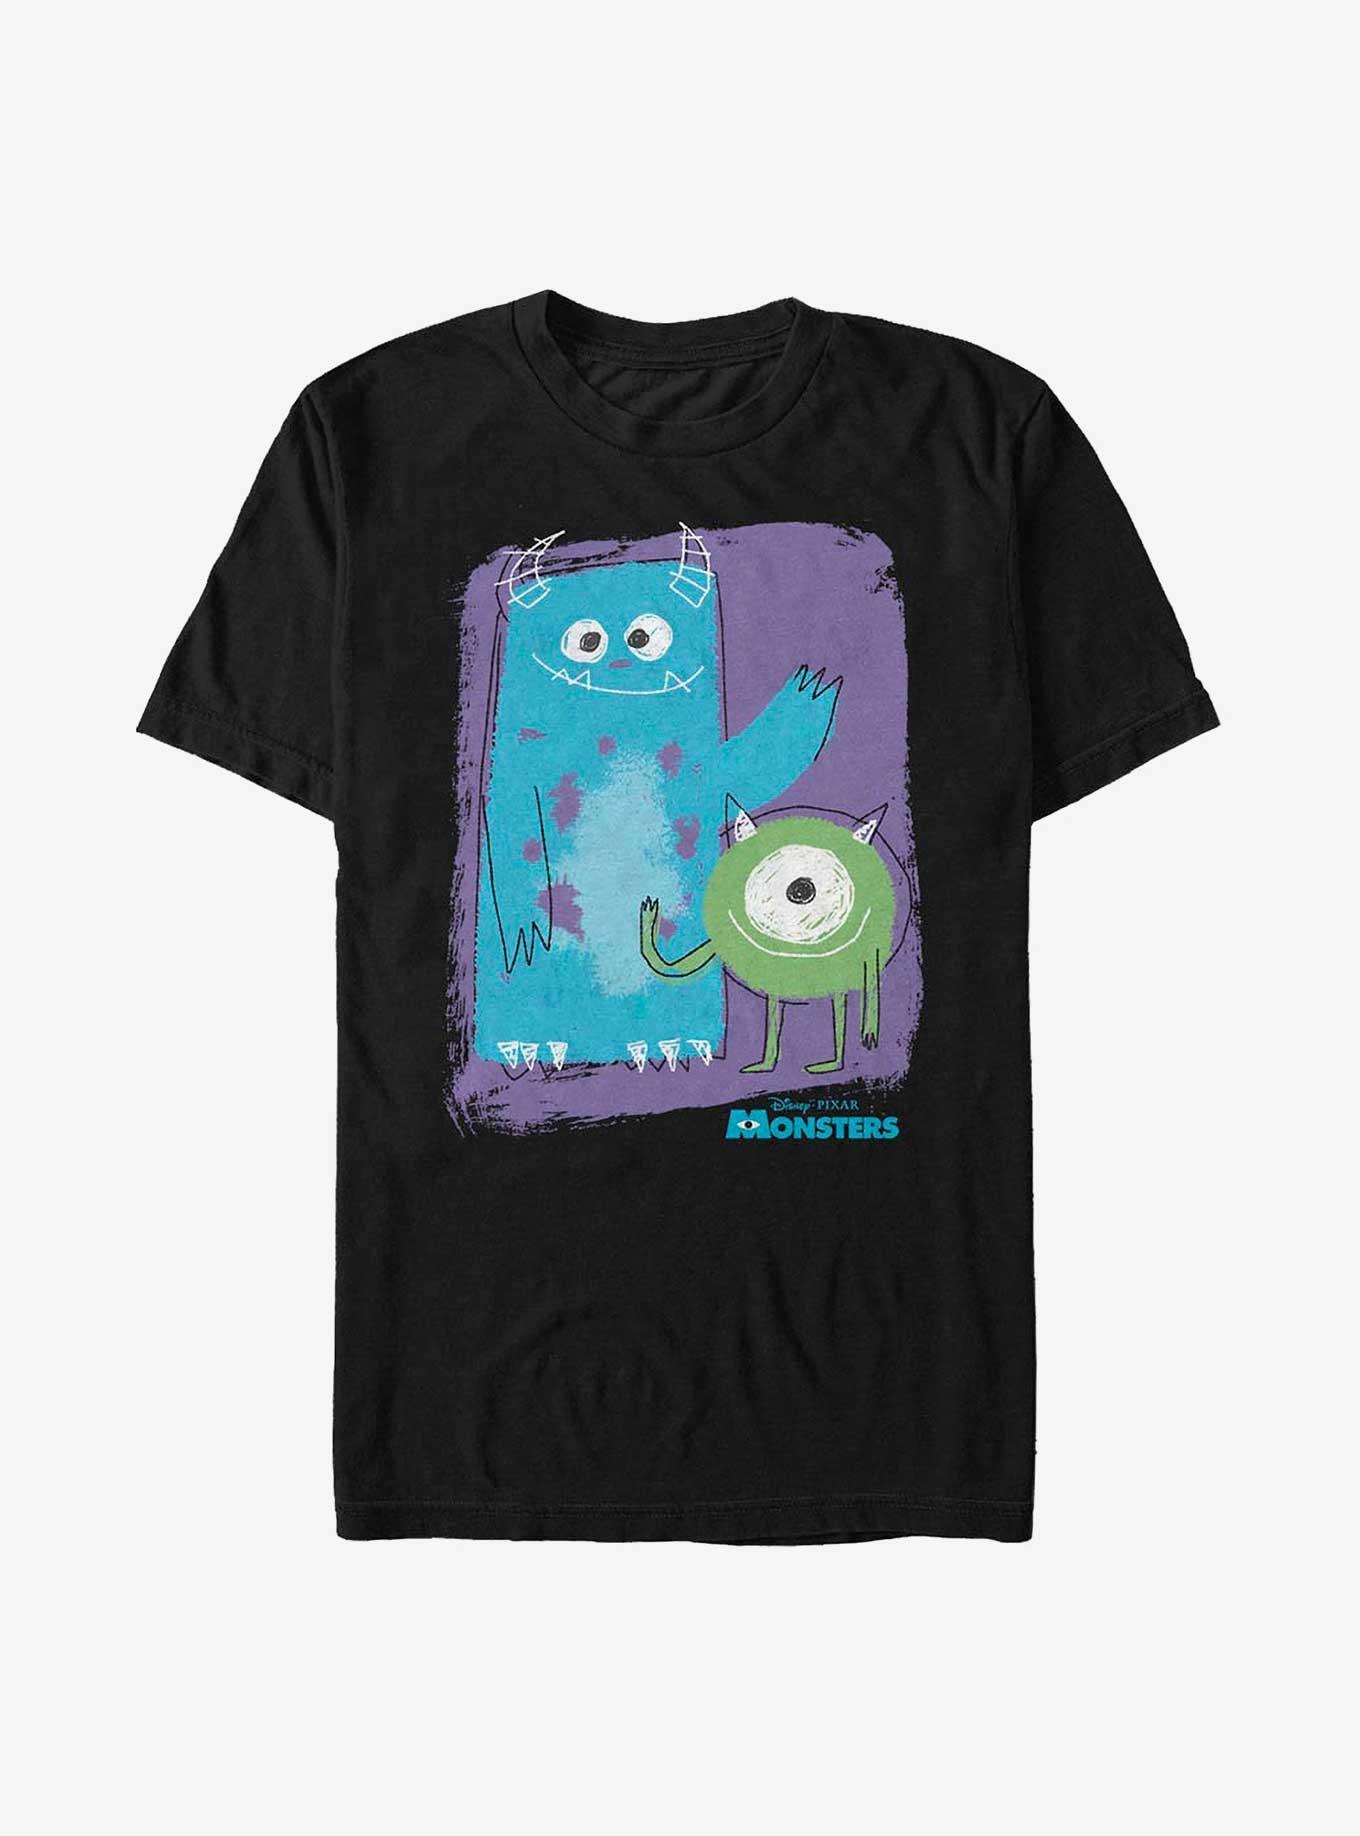 Disney Pixar Monsters University Sulley and Mike T-Shirt